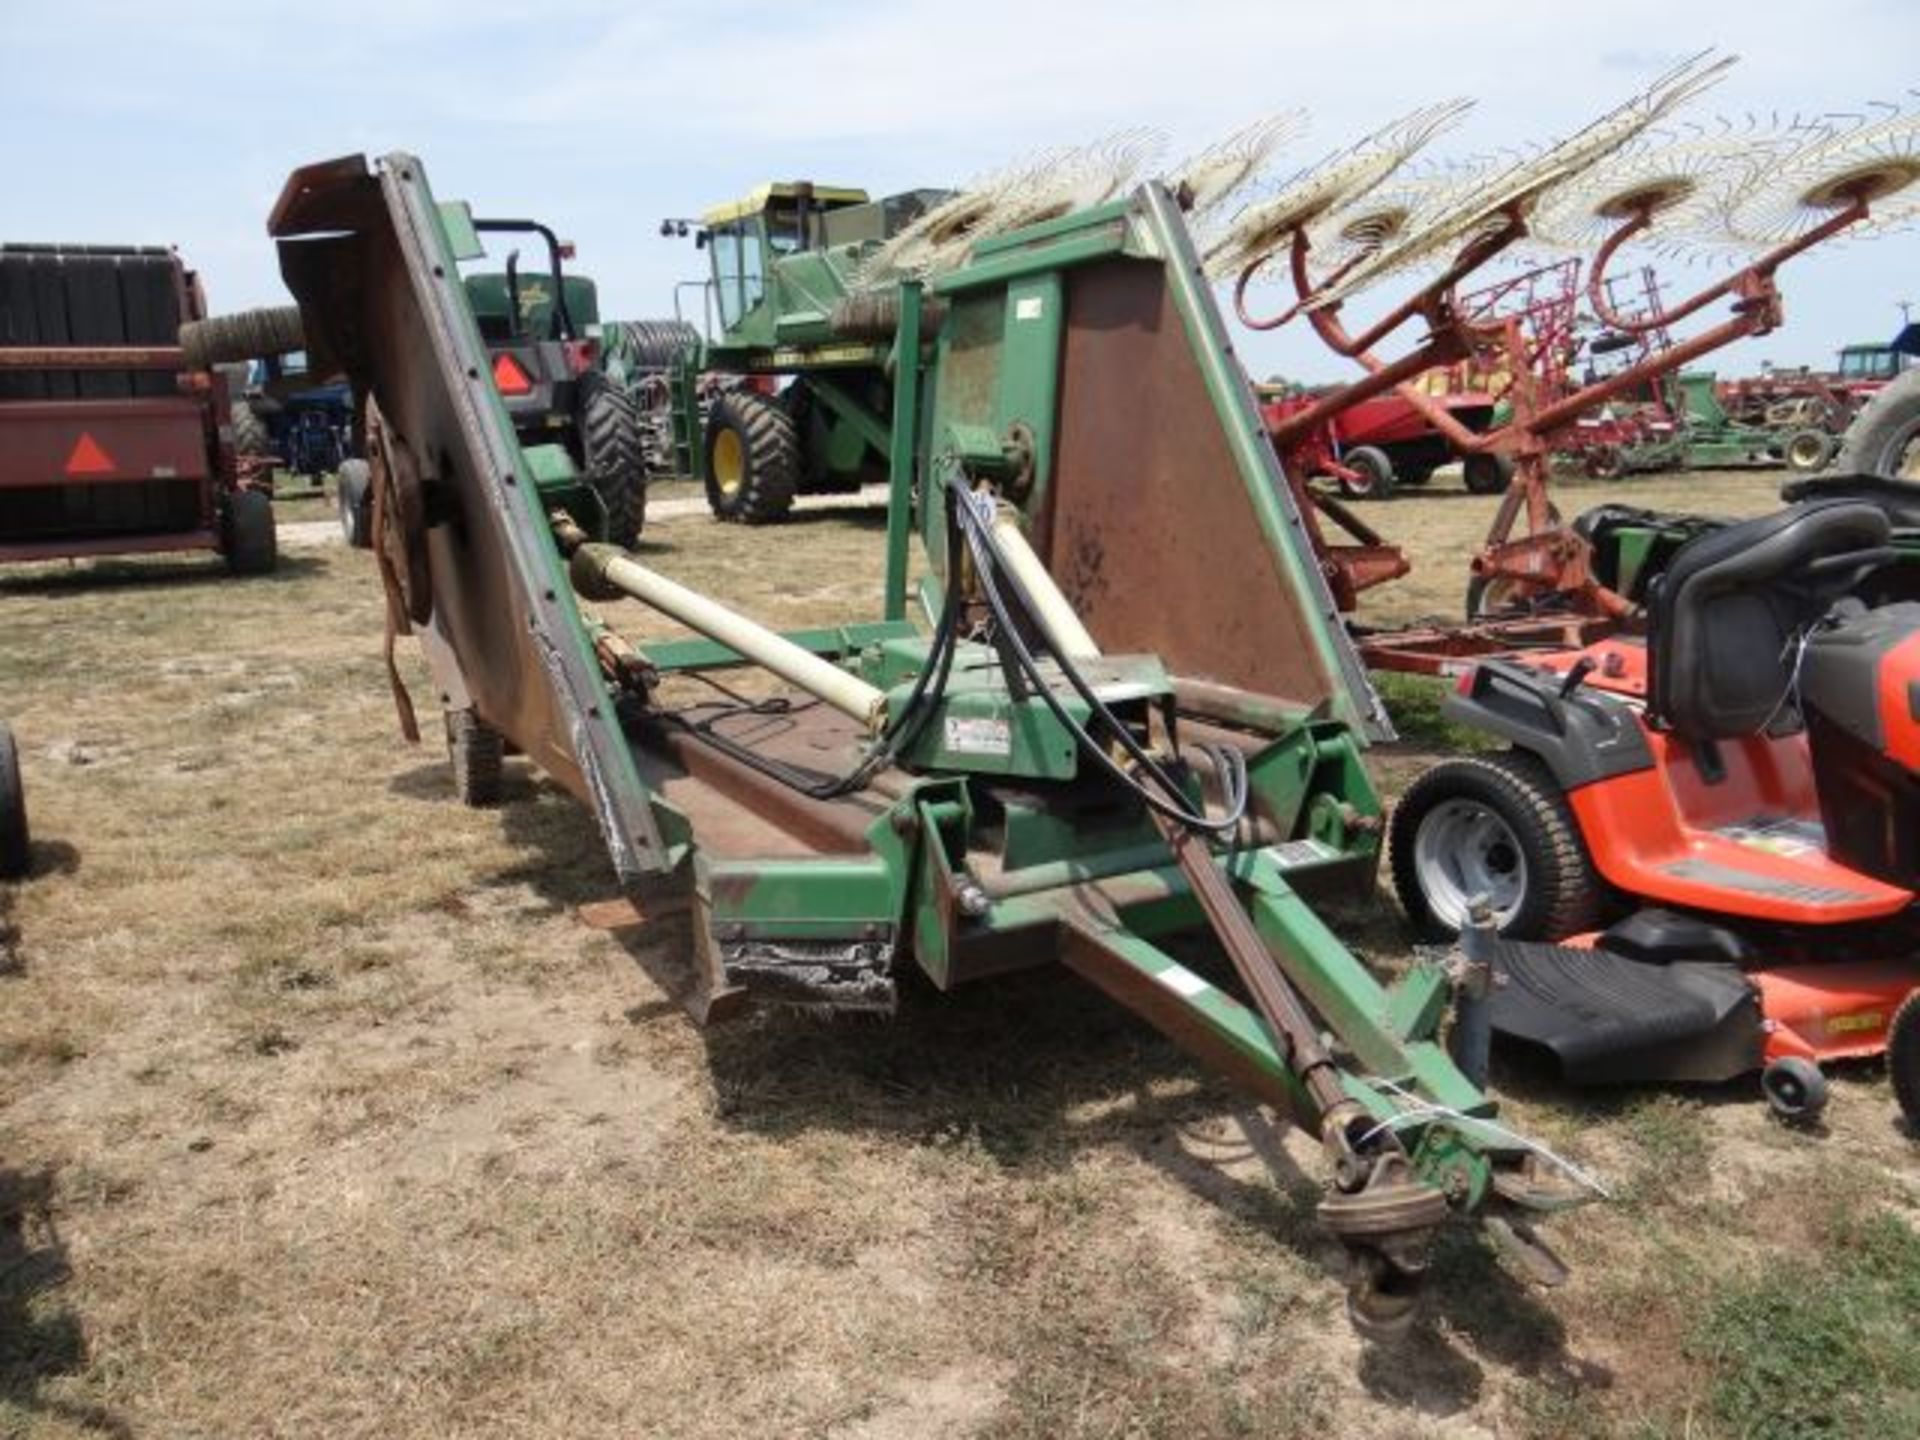 JD 1518 Cutter #152101, 1000 PTO, Laminated Tires